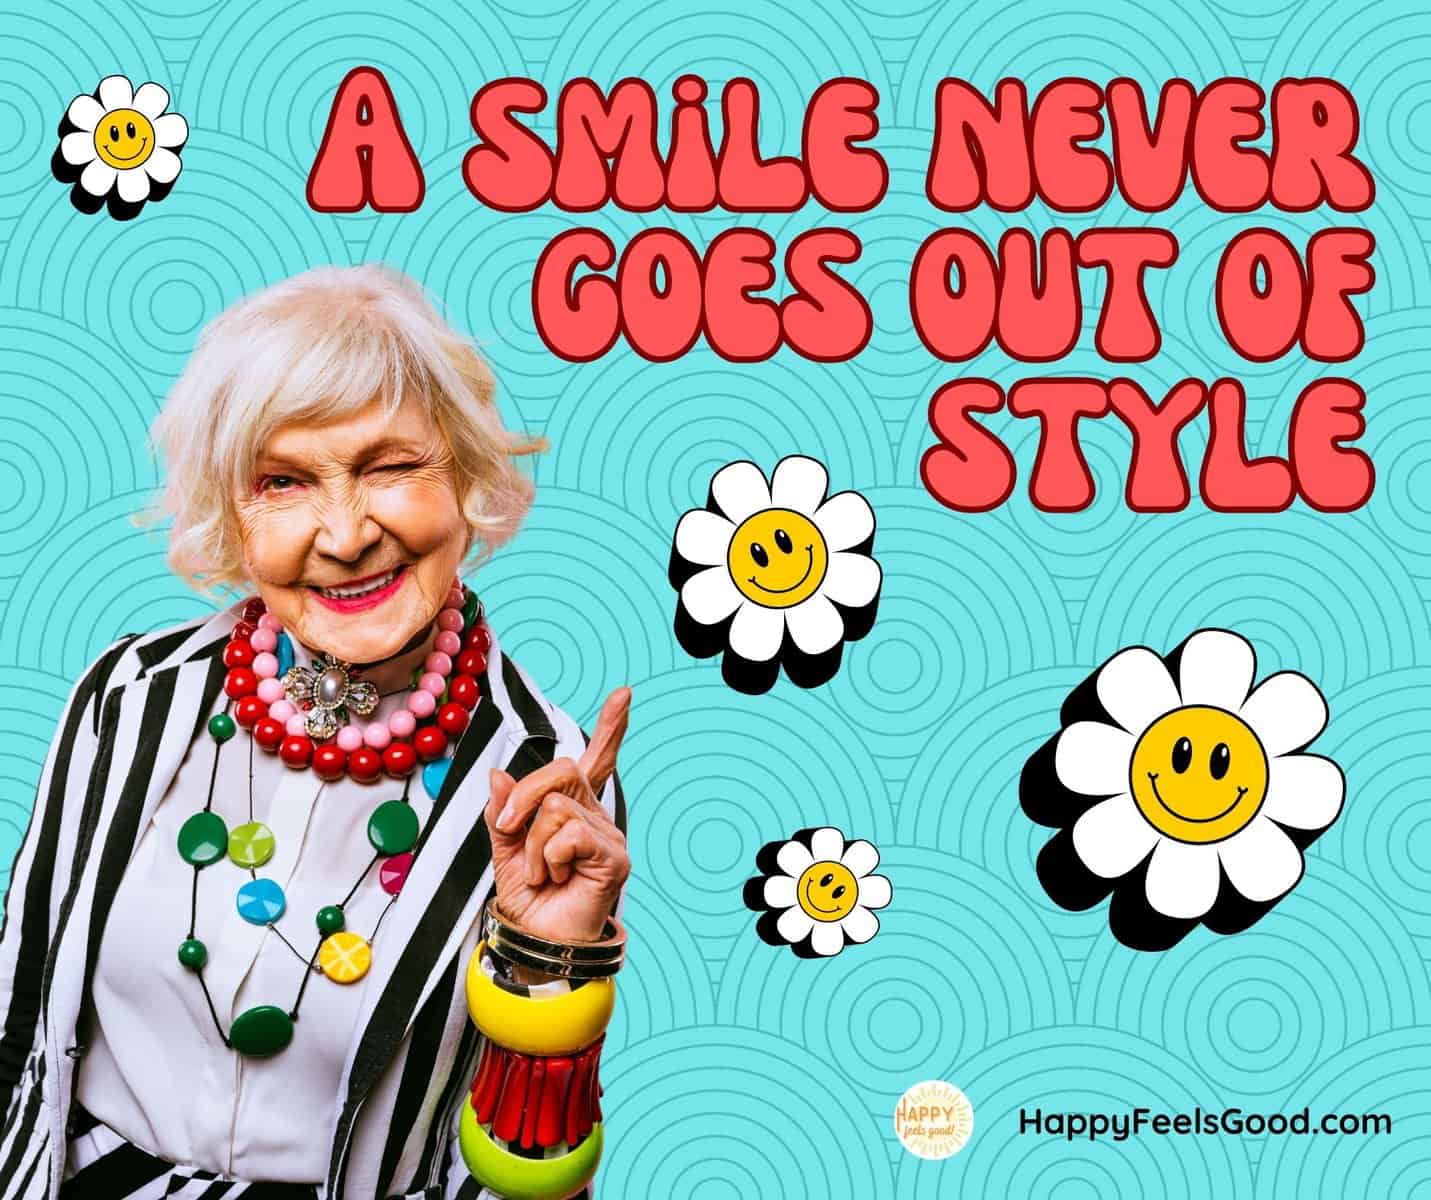 Quote A Smile Never Goes Out Of Style